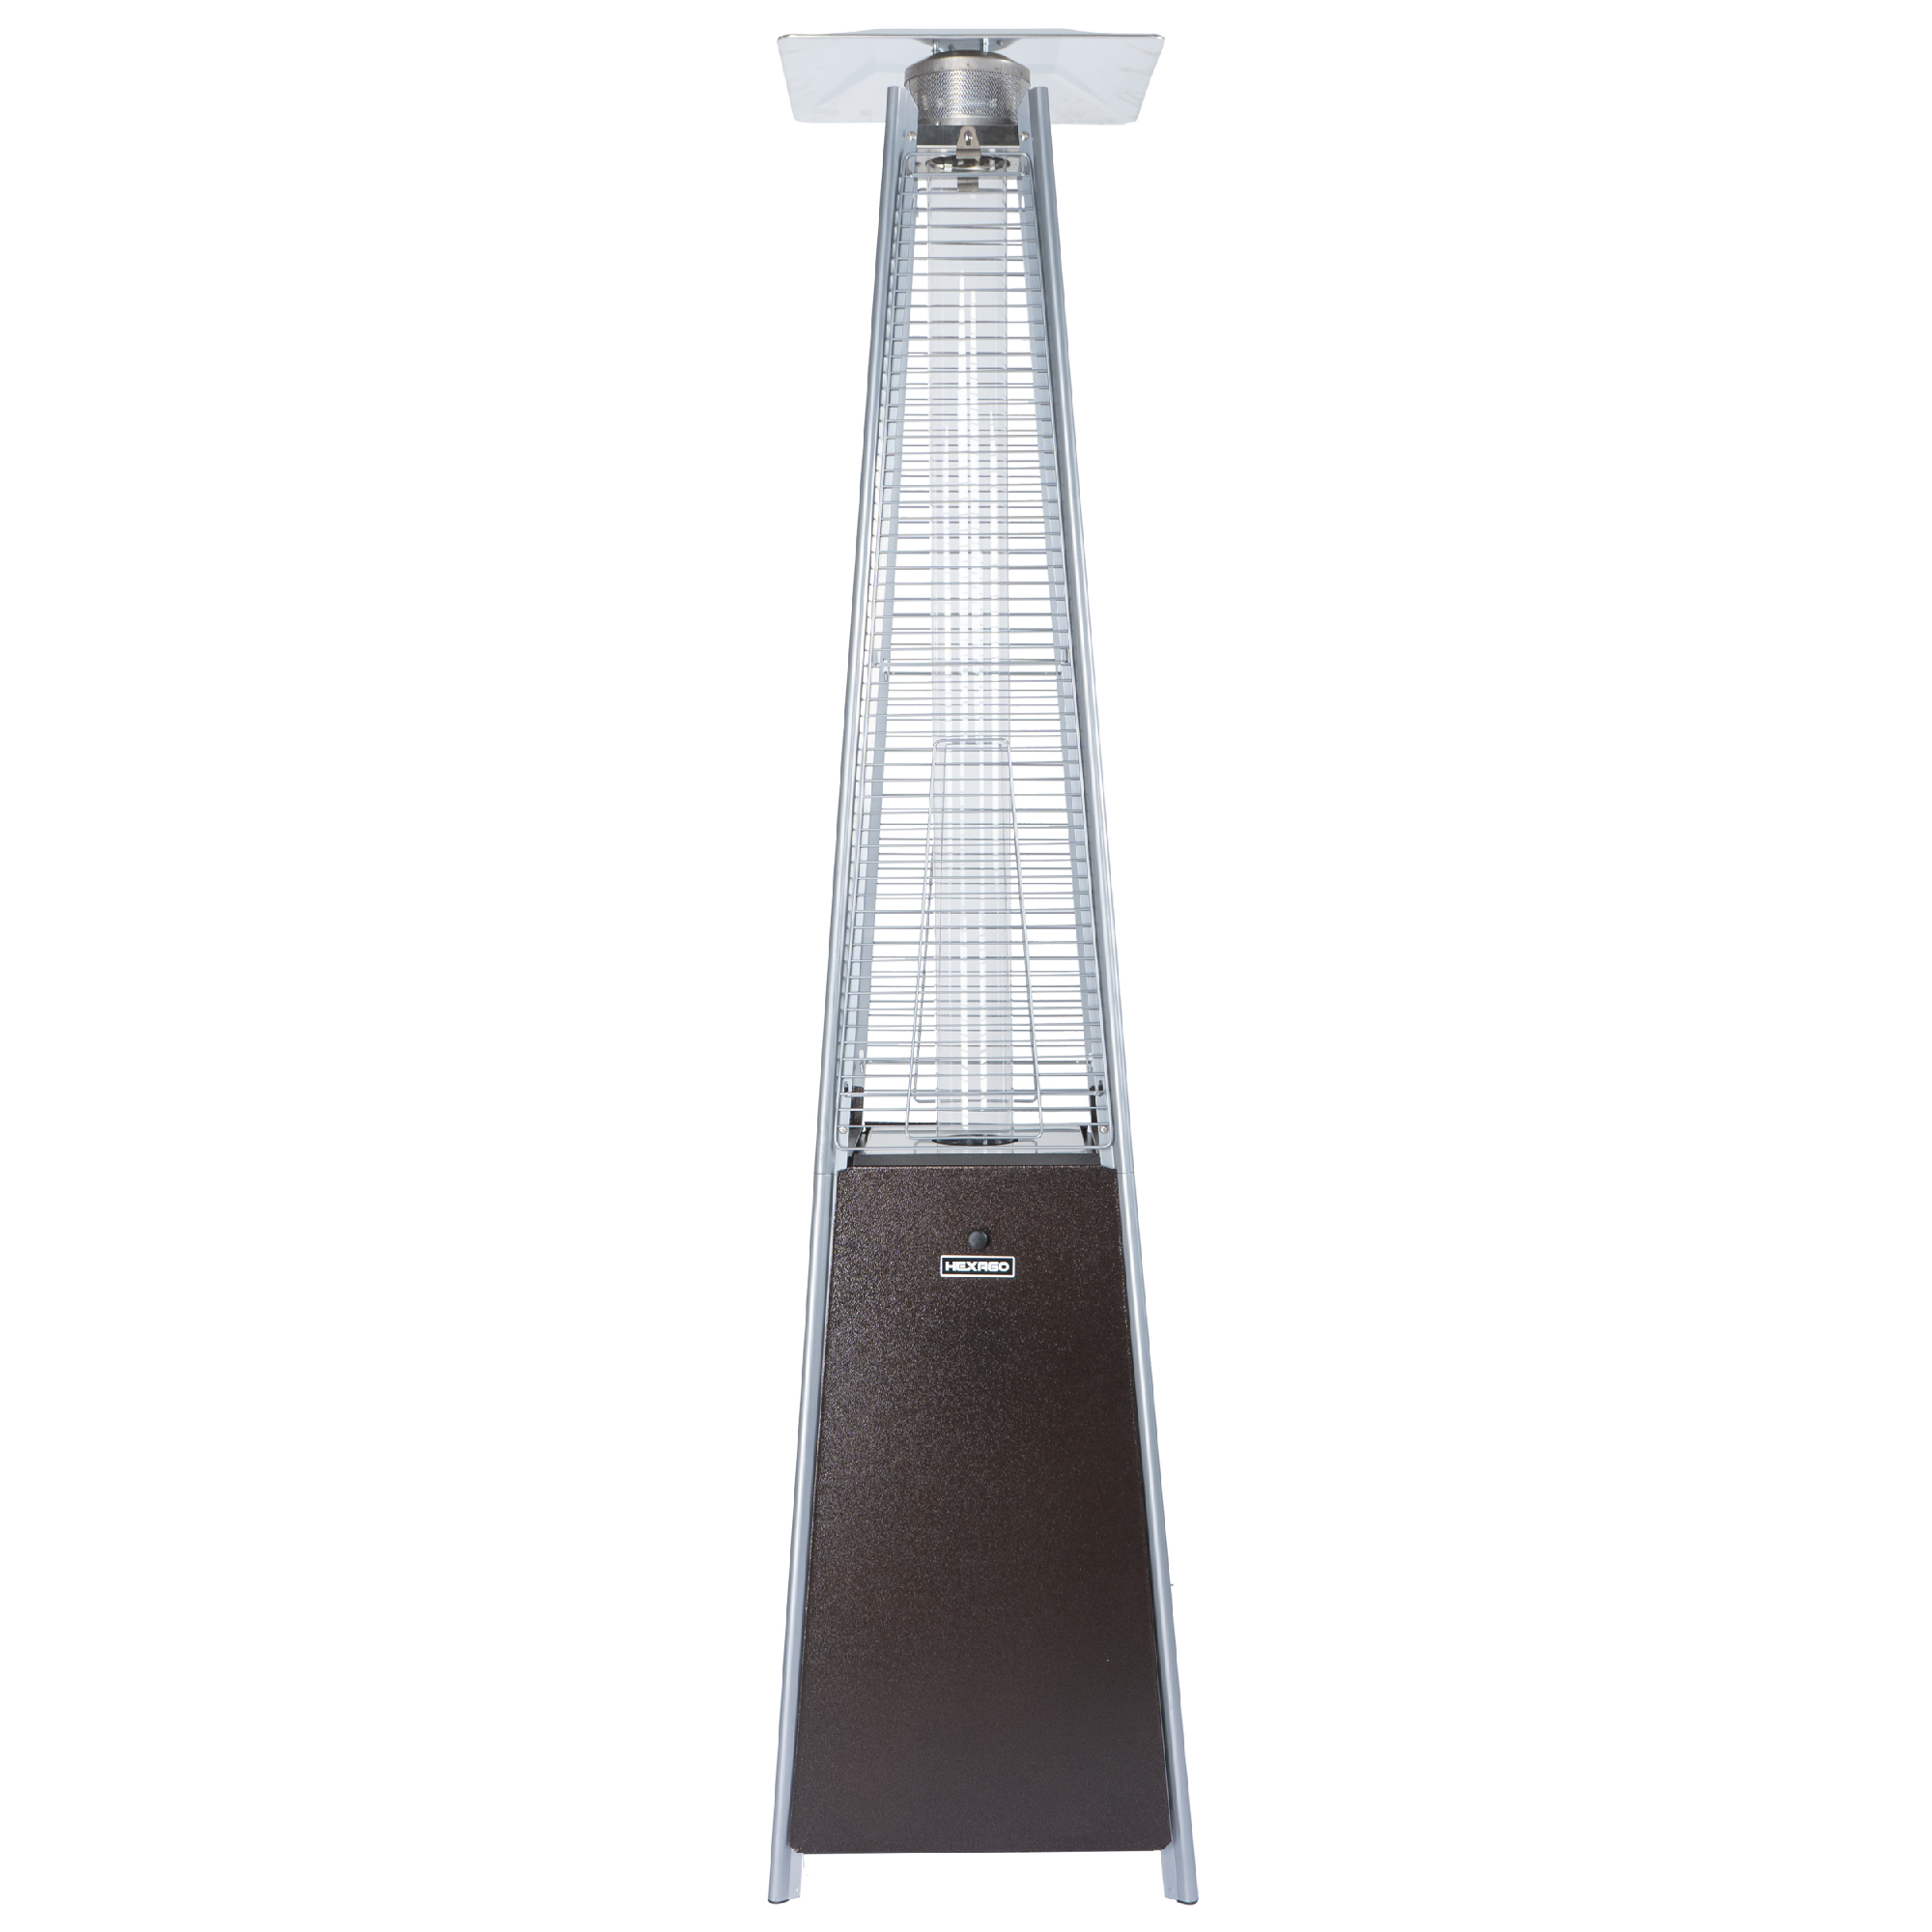 HEXAGO 40,000 BTU Pyramid Comme rcial Outdoor Patio Heater with Wheels, ETL Listed - image 1 of 7